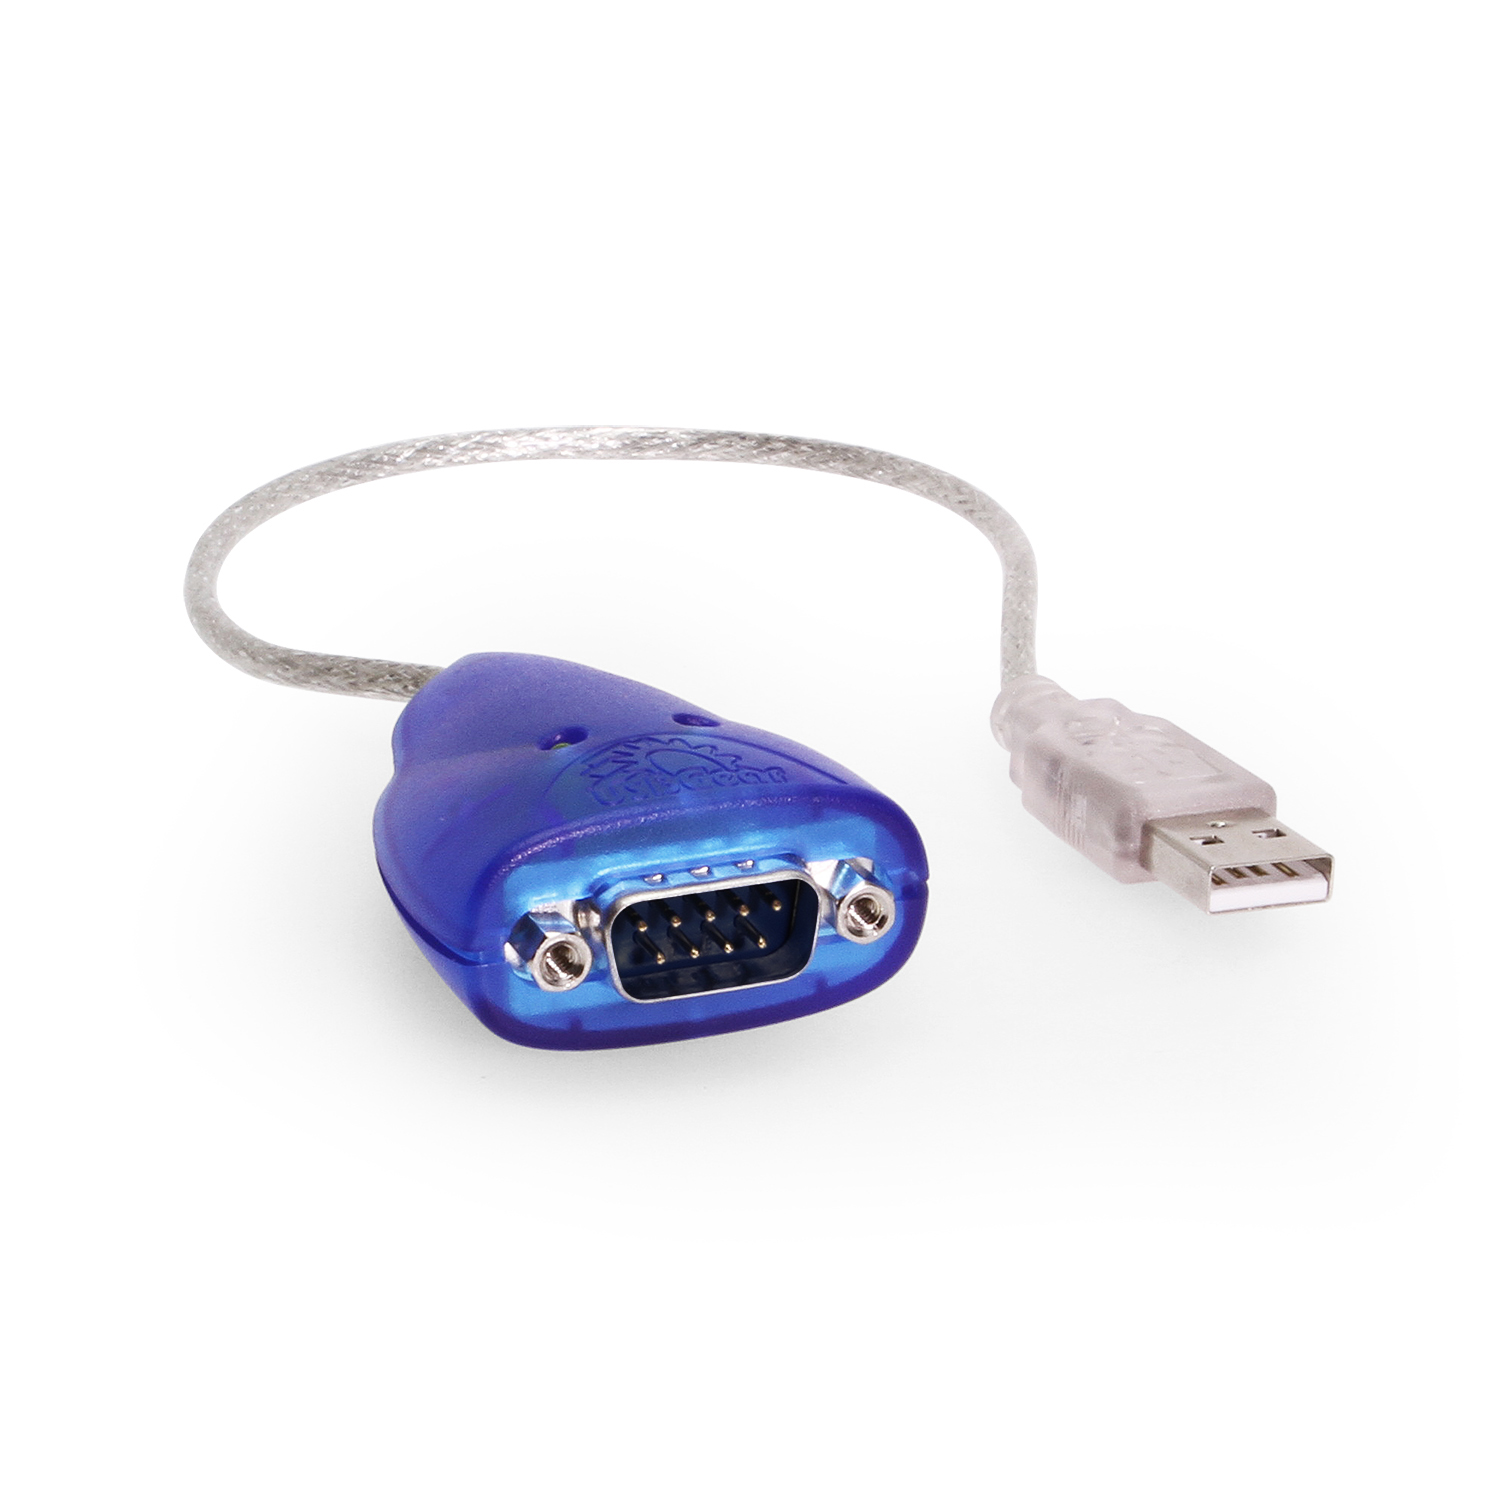 Usb To Rs232 Serial Port Db9 9 Pin Male Com Port Converter Adapter